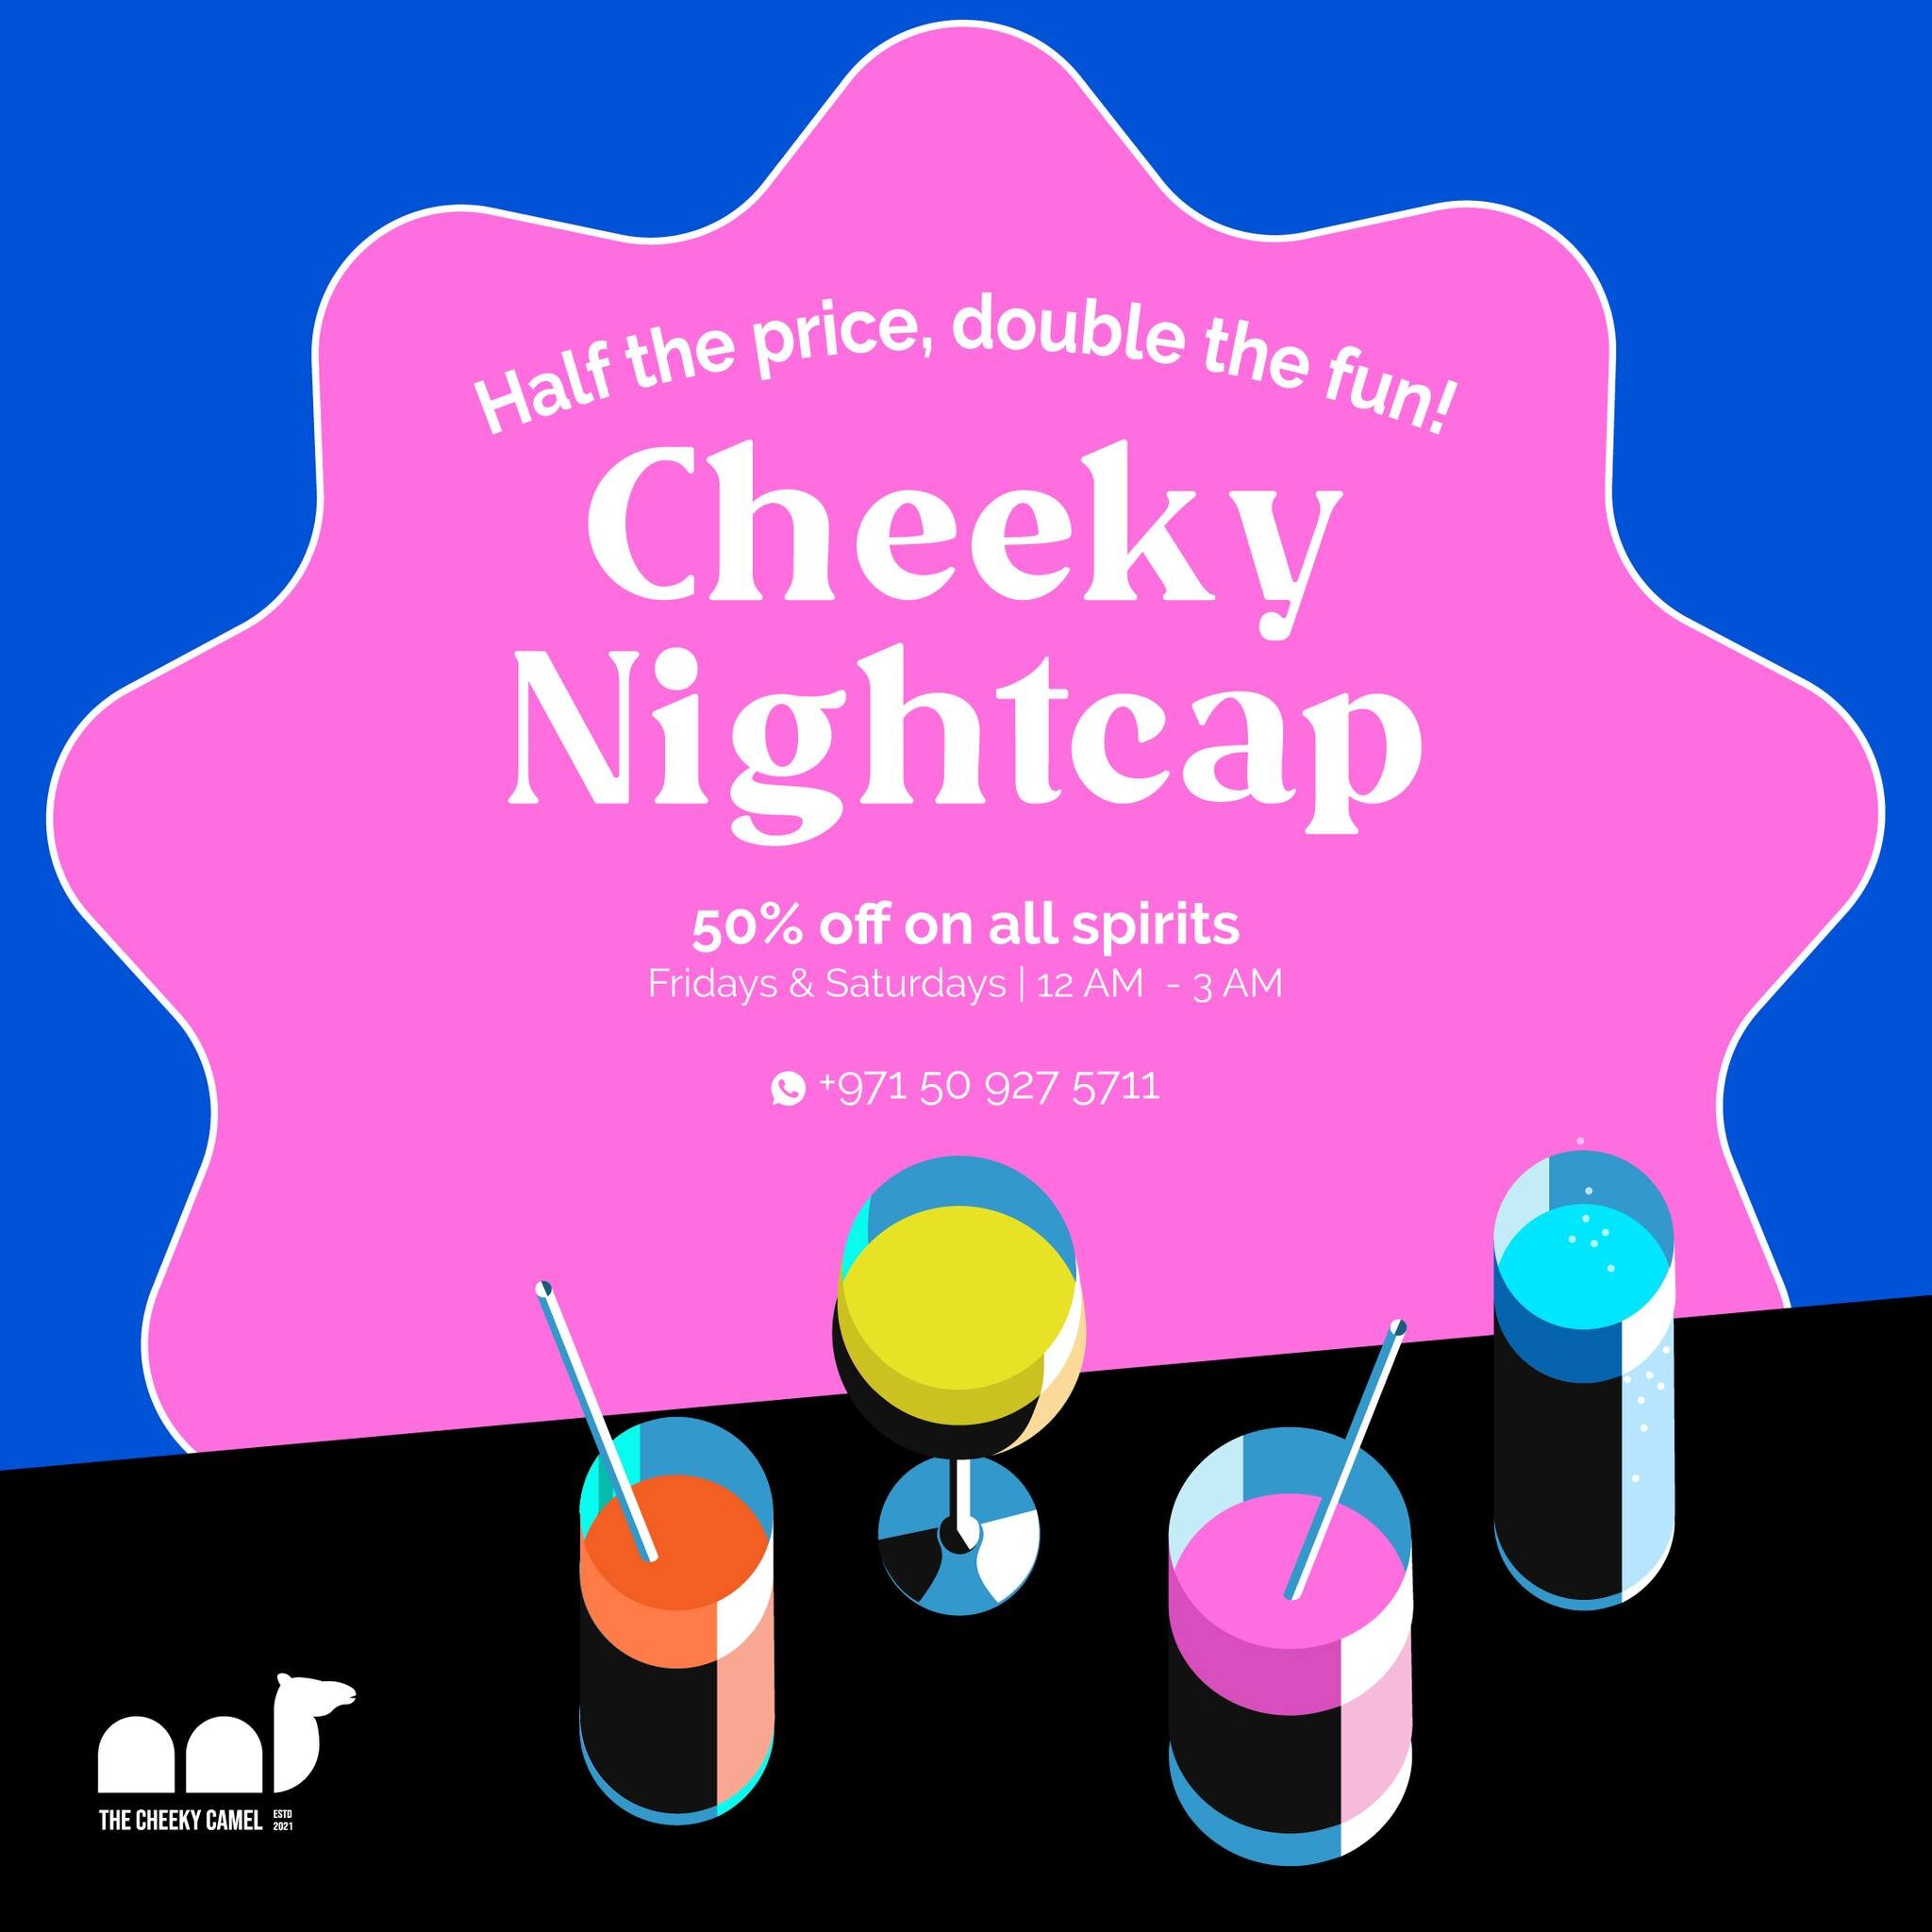 The Cheeky Nightcap is the perfect excuse to stay up late and get a little cheeky with your drinks. Enjoy ALL spirits at 50% off from 12 AM to 3 AM.